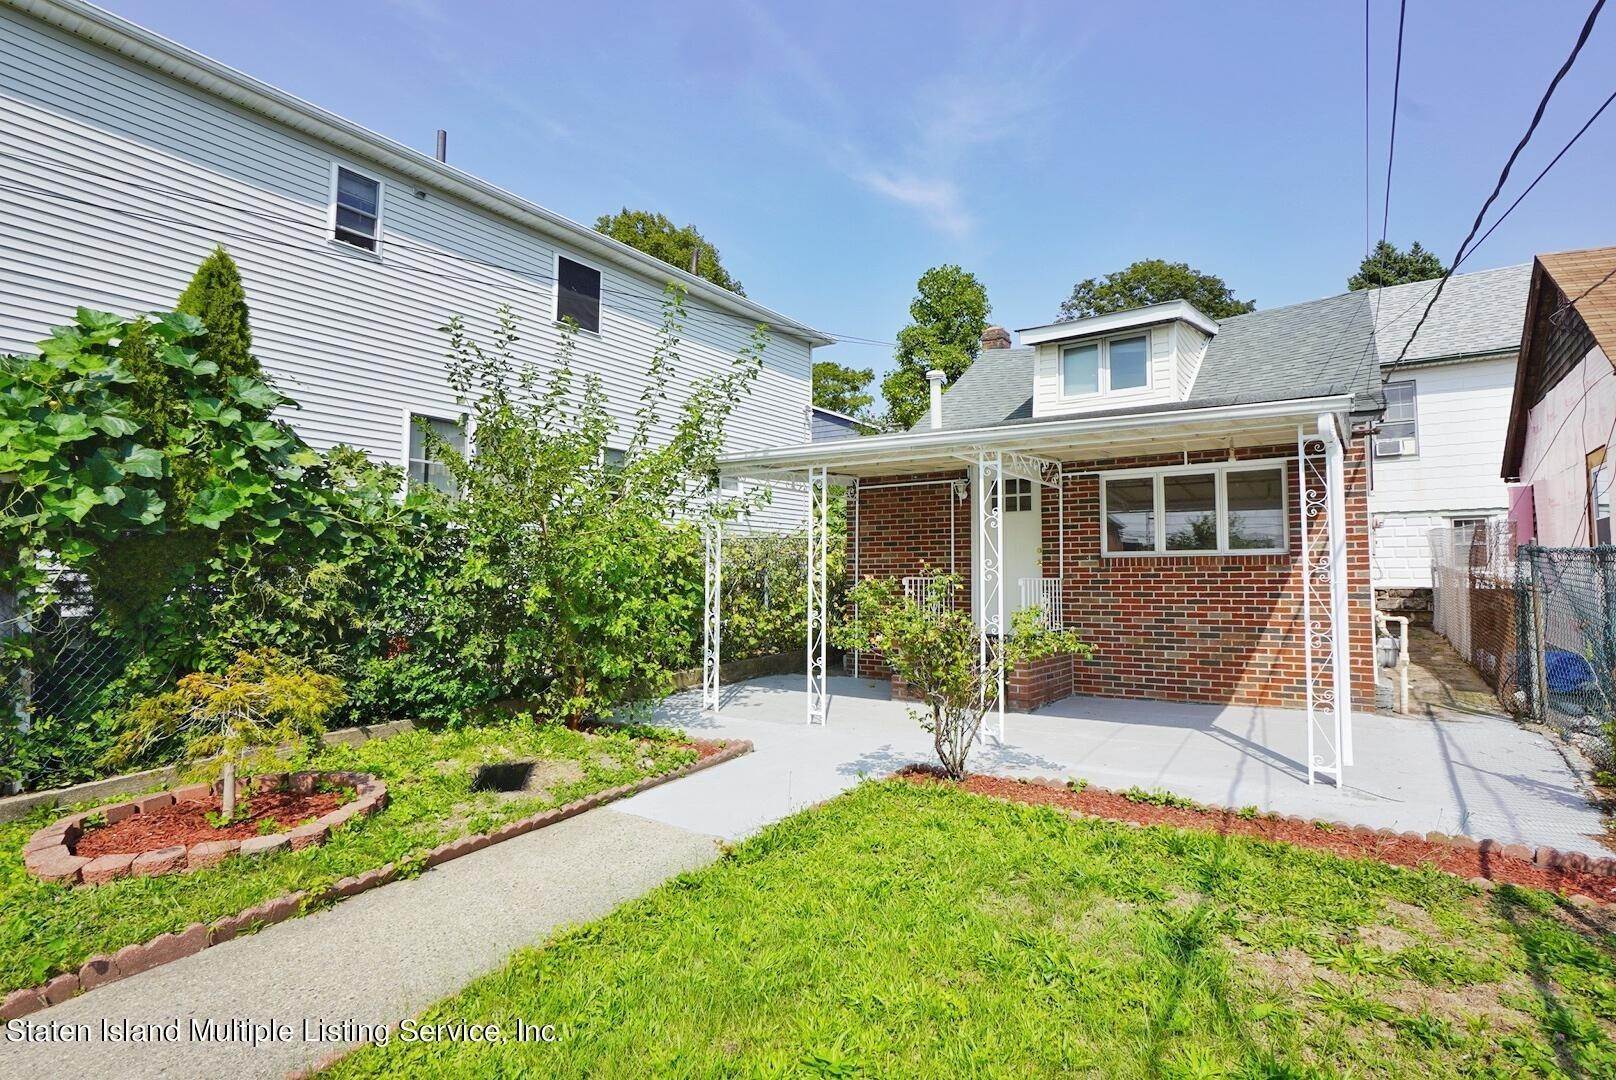 Single Family for Sale at South Beach, Staten Island, NY 10305